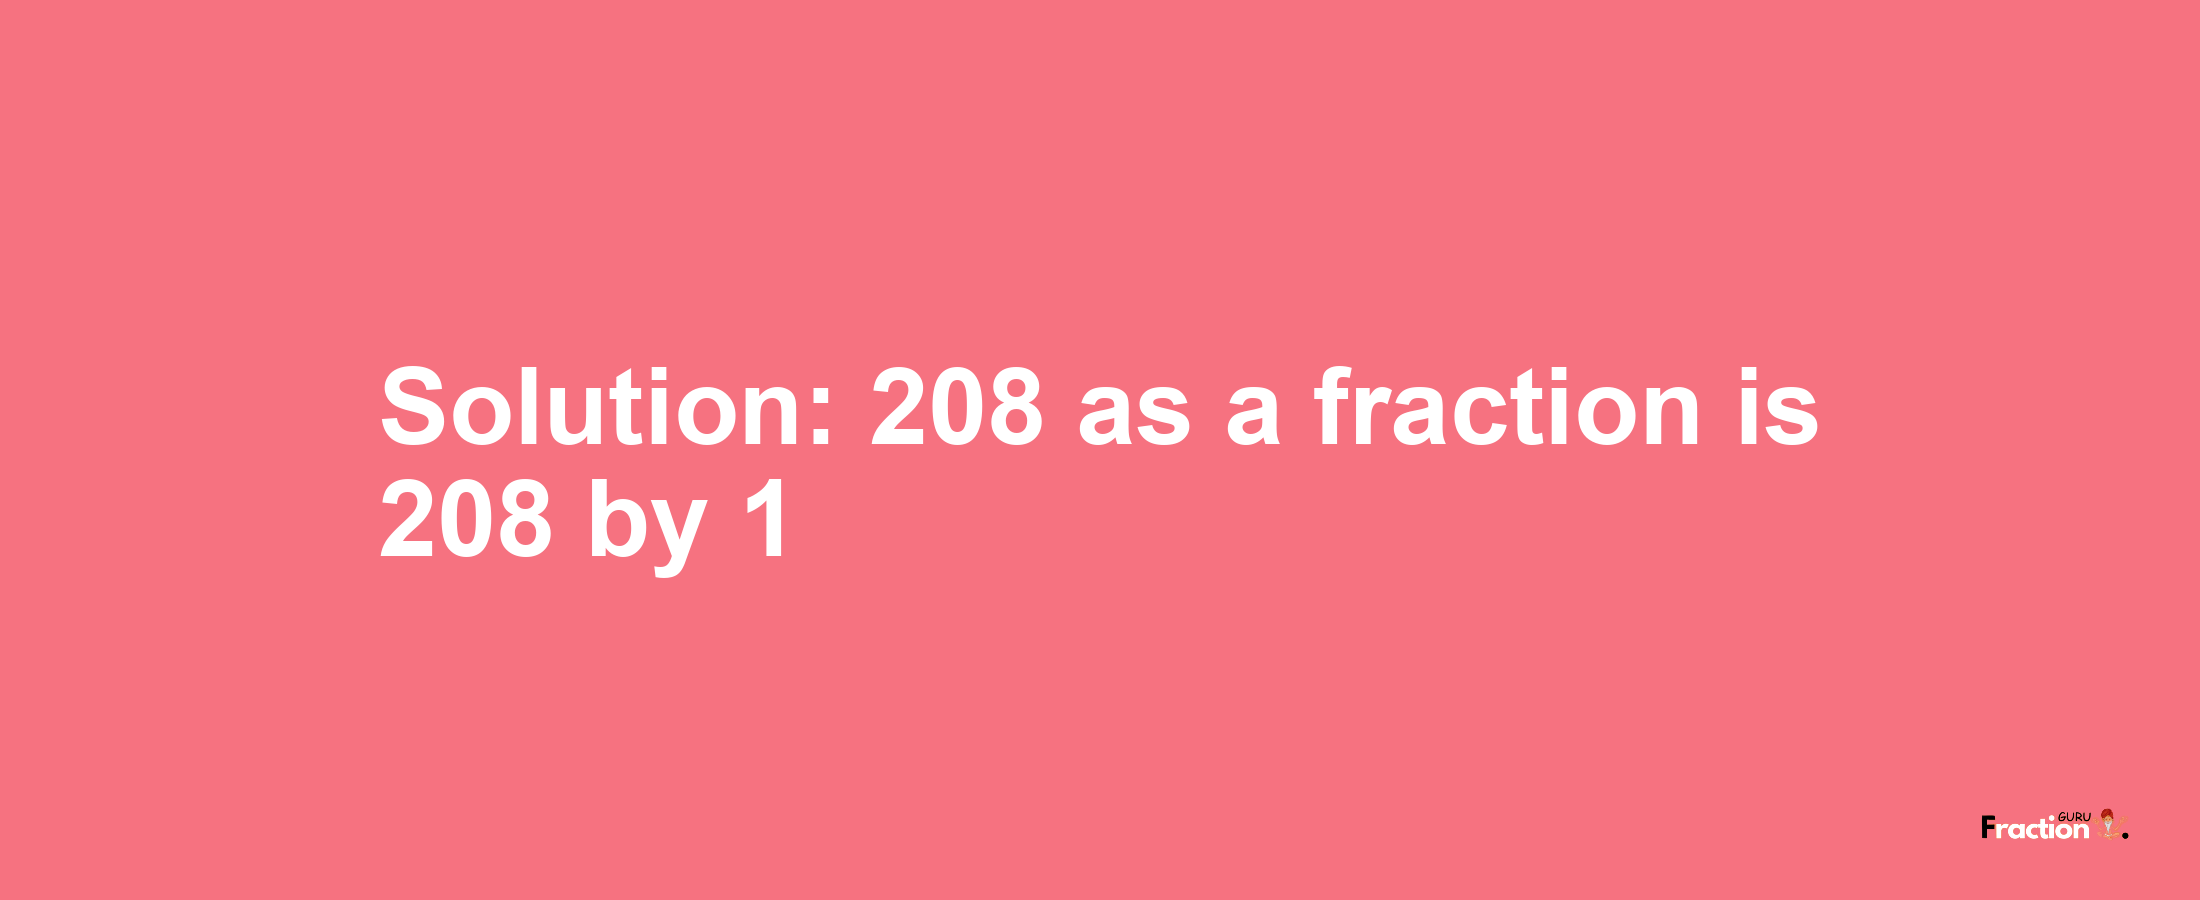 Solution:208 as a fraction is 208/1